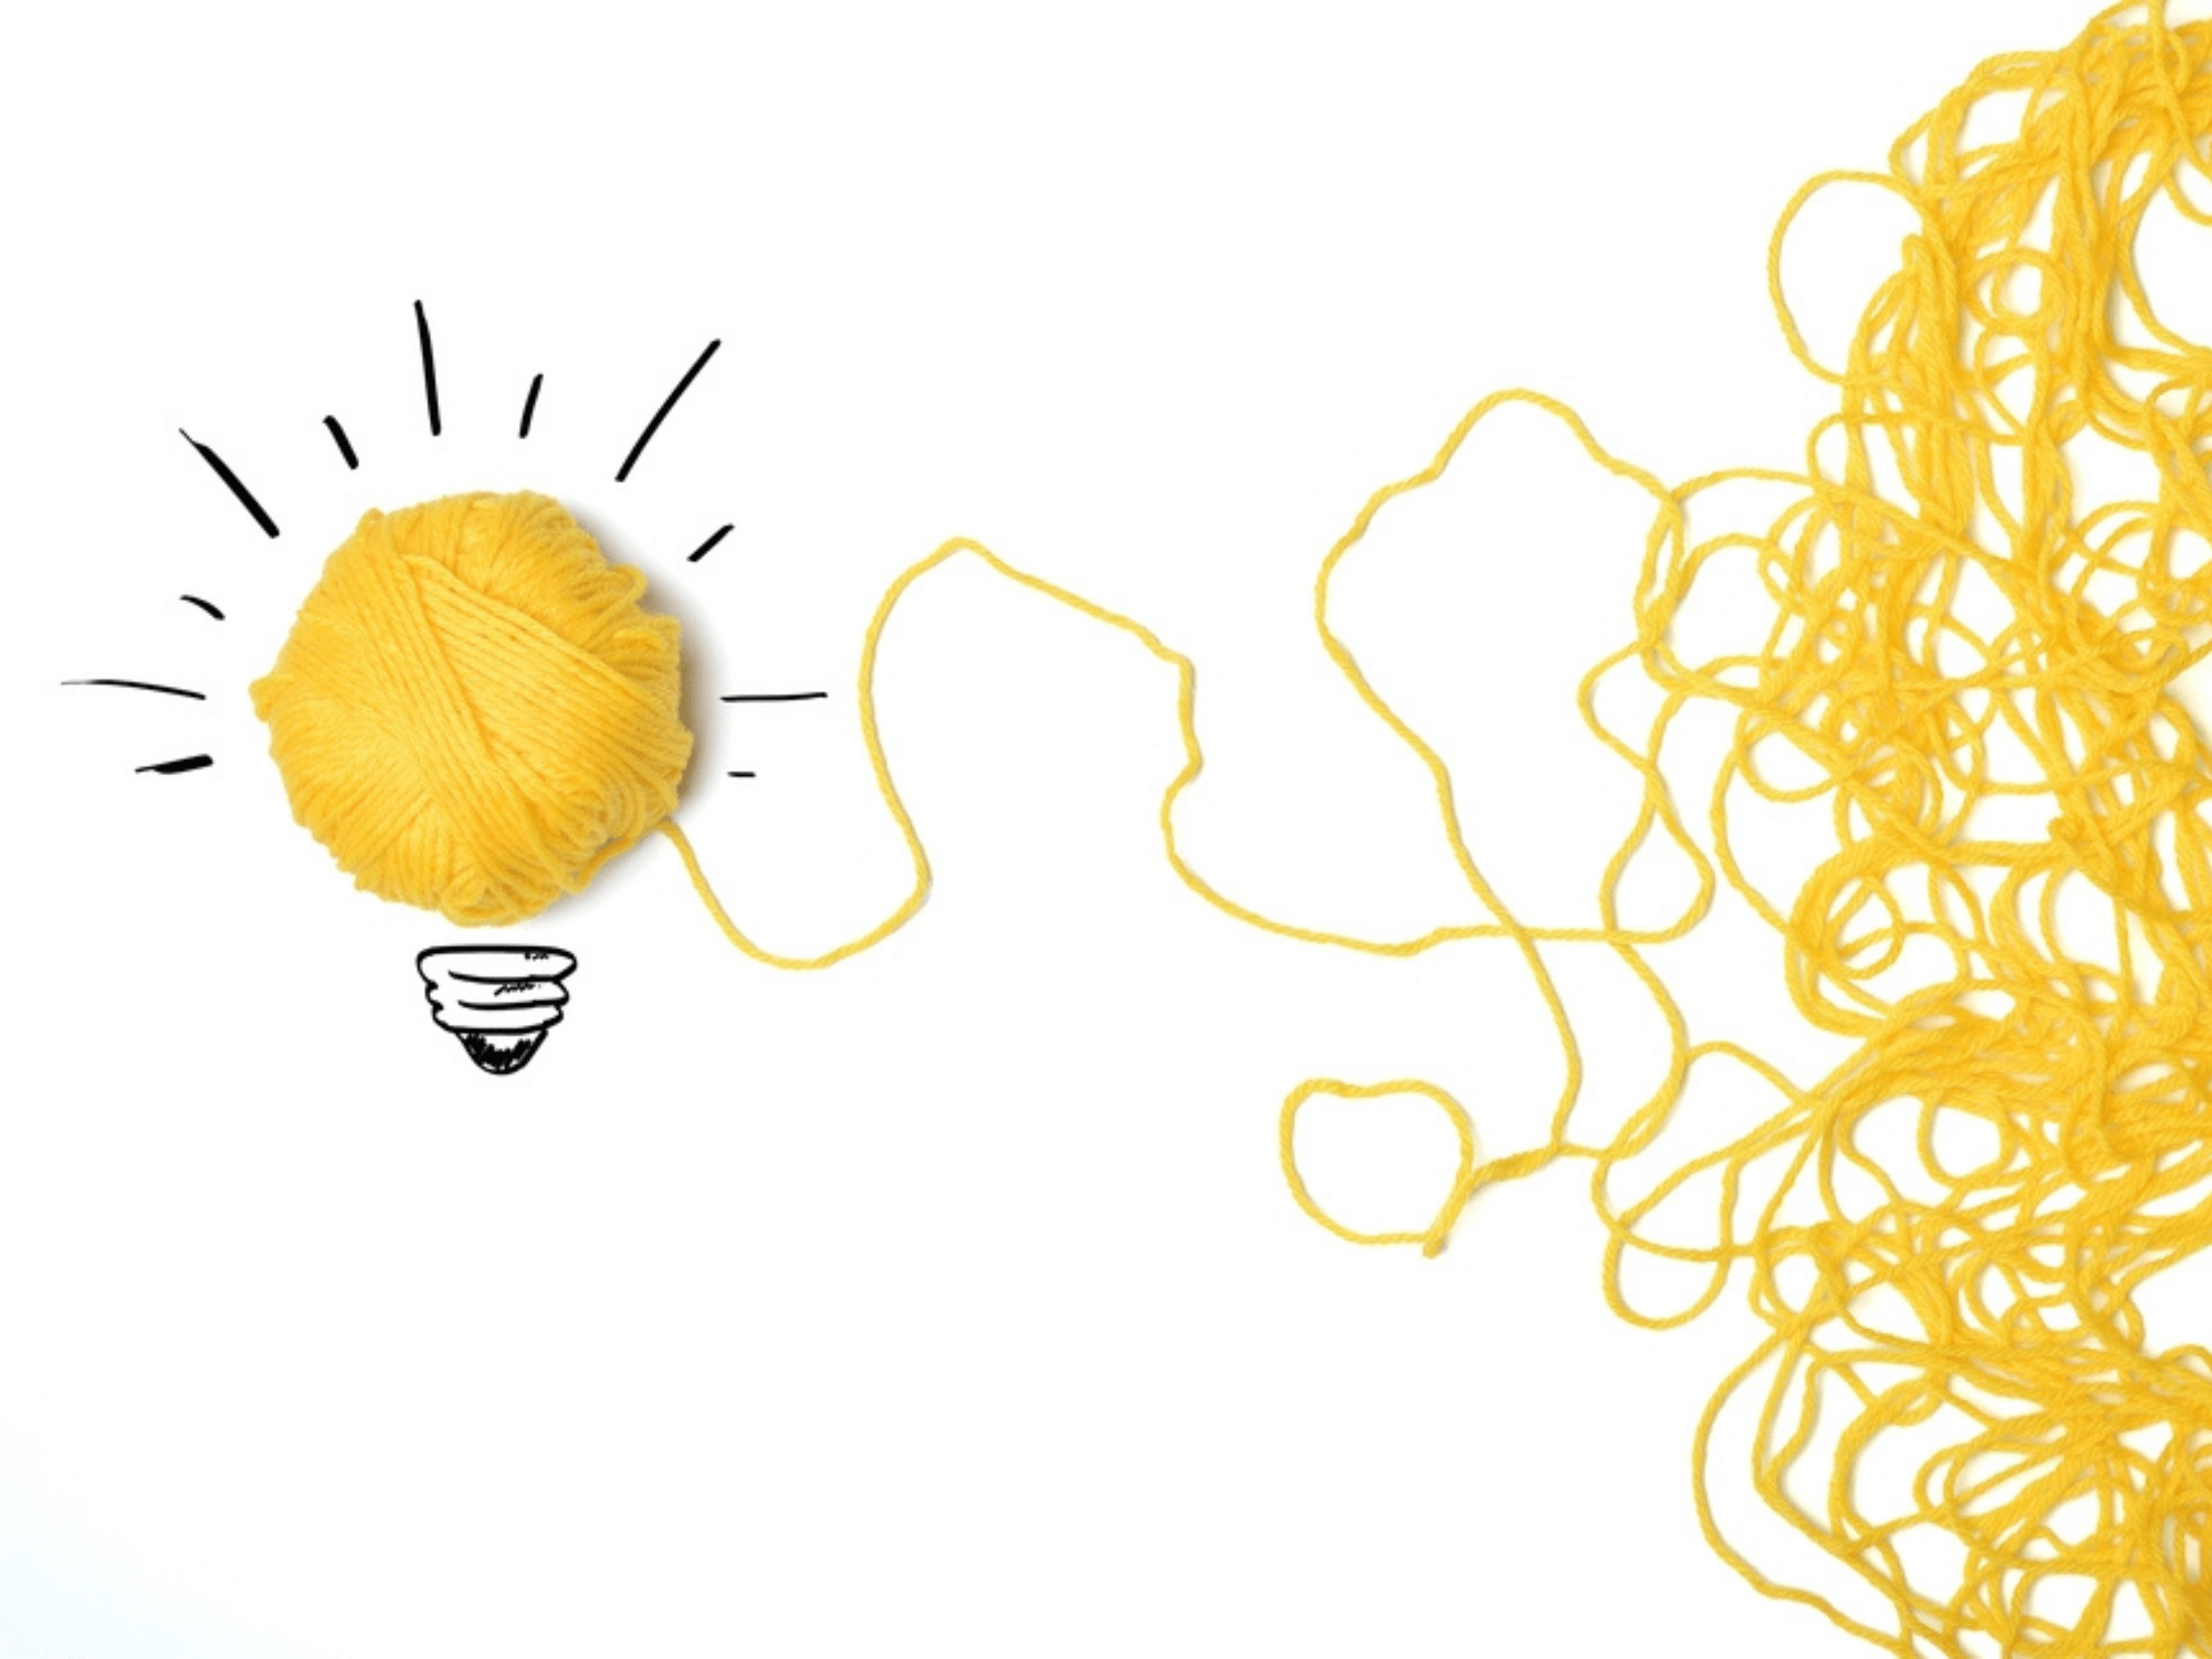 Concept of concise, powerful content is symbolized by tidy ball of yellow yarn made from mass of loose yarn